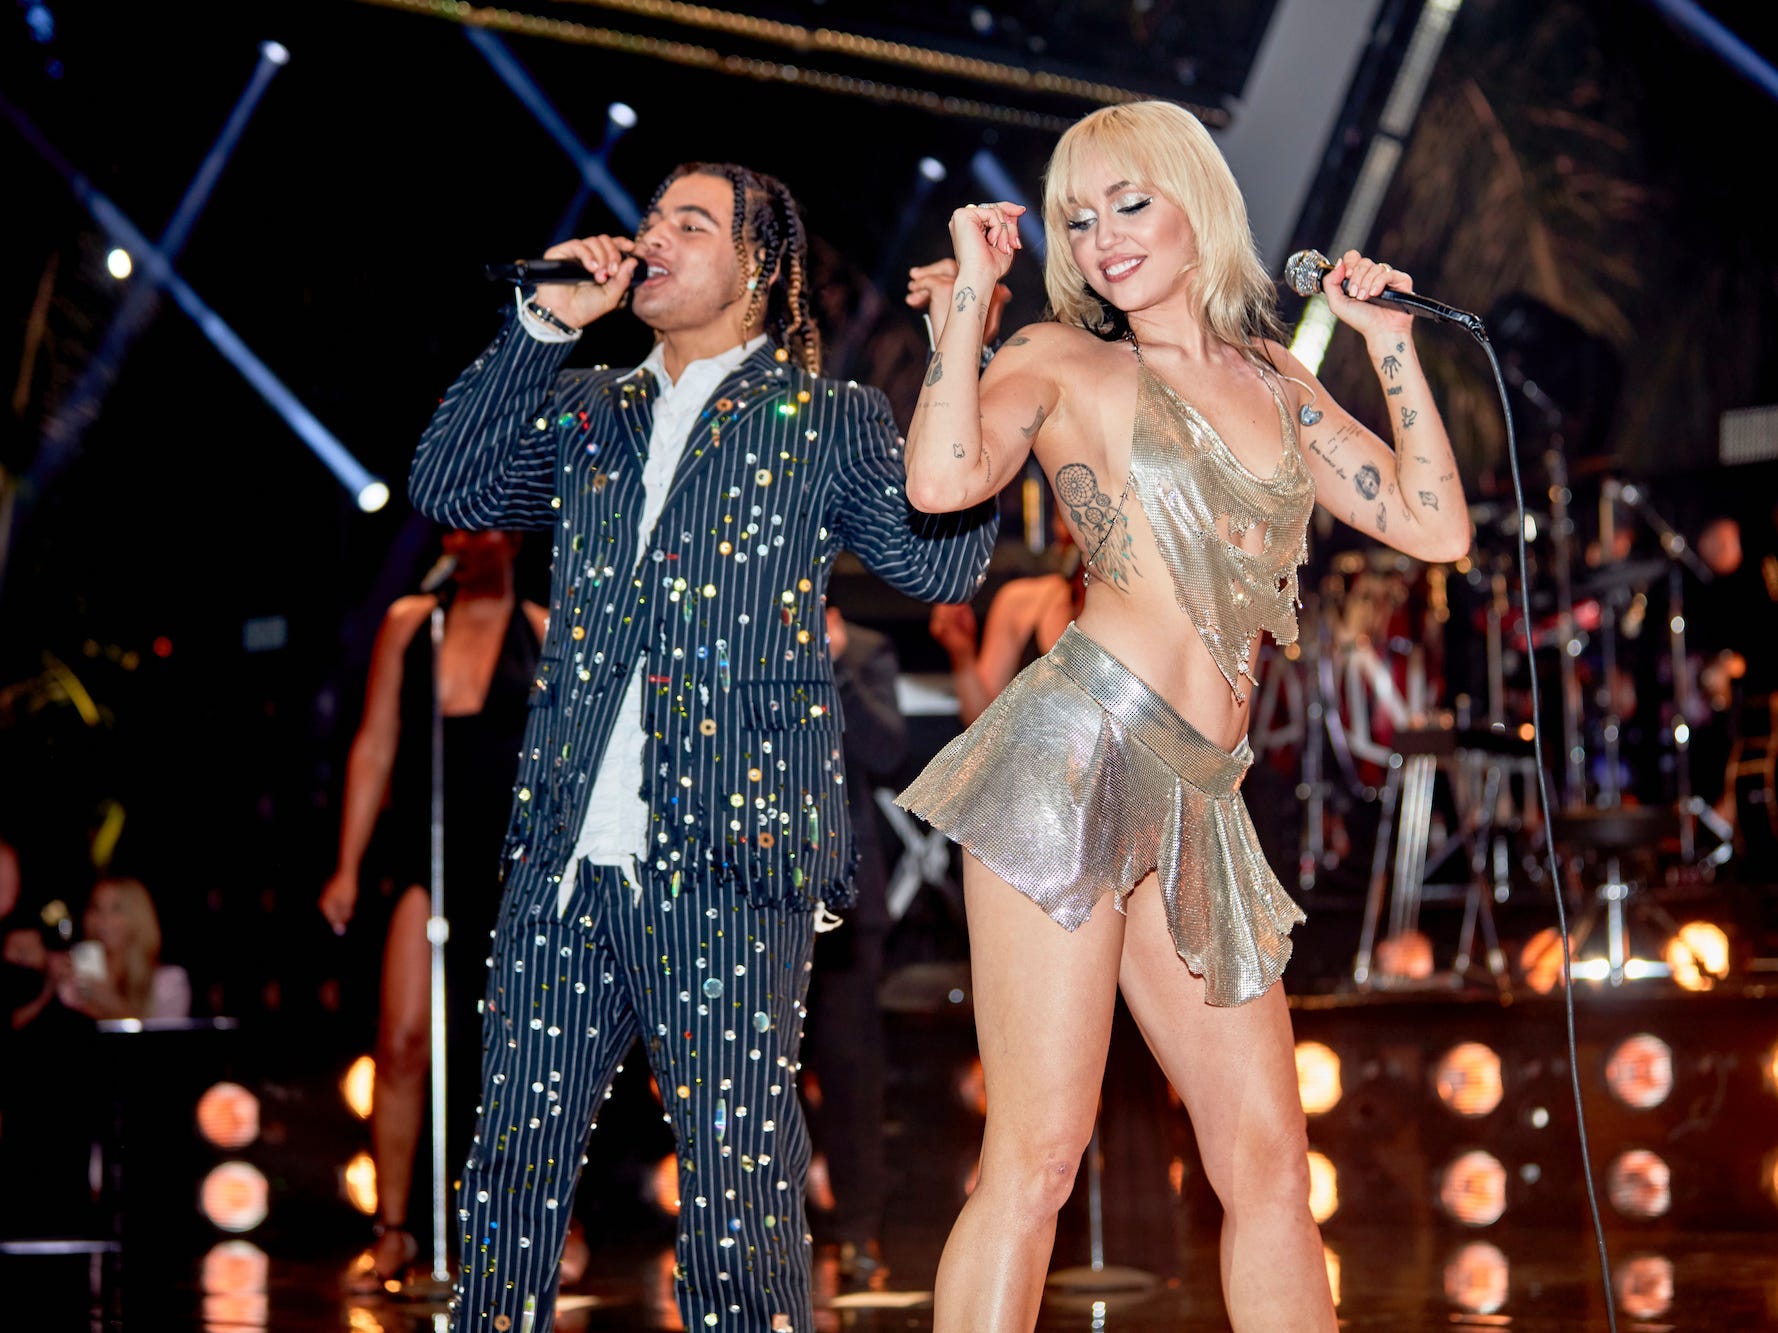 Miley Cyrus and 24kGoldn perform in Florida on New Year's Eve 2021.